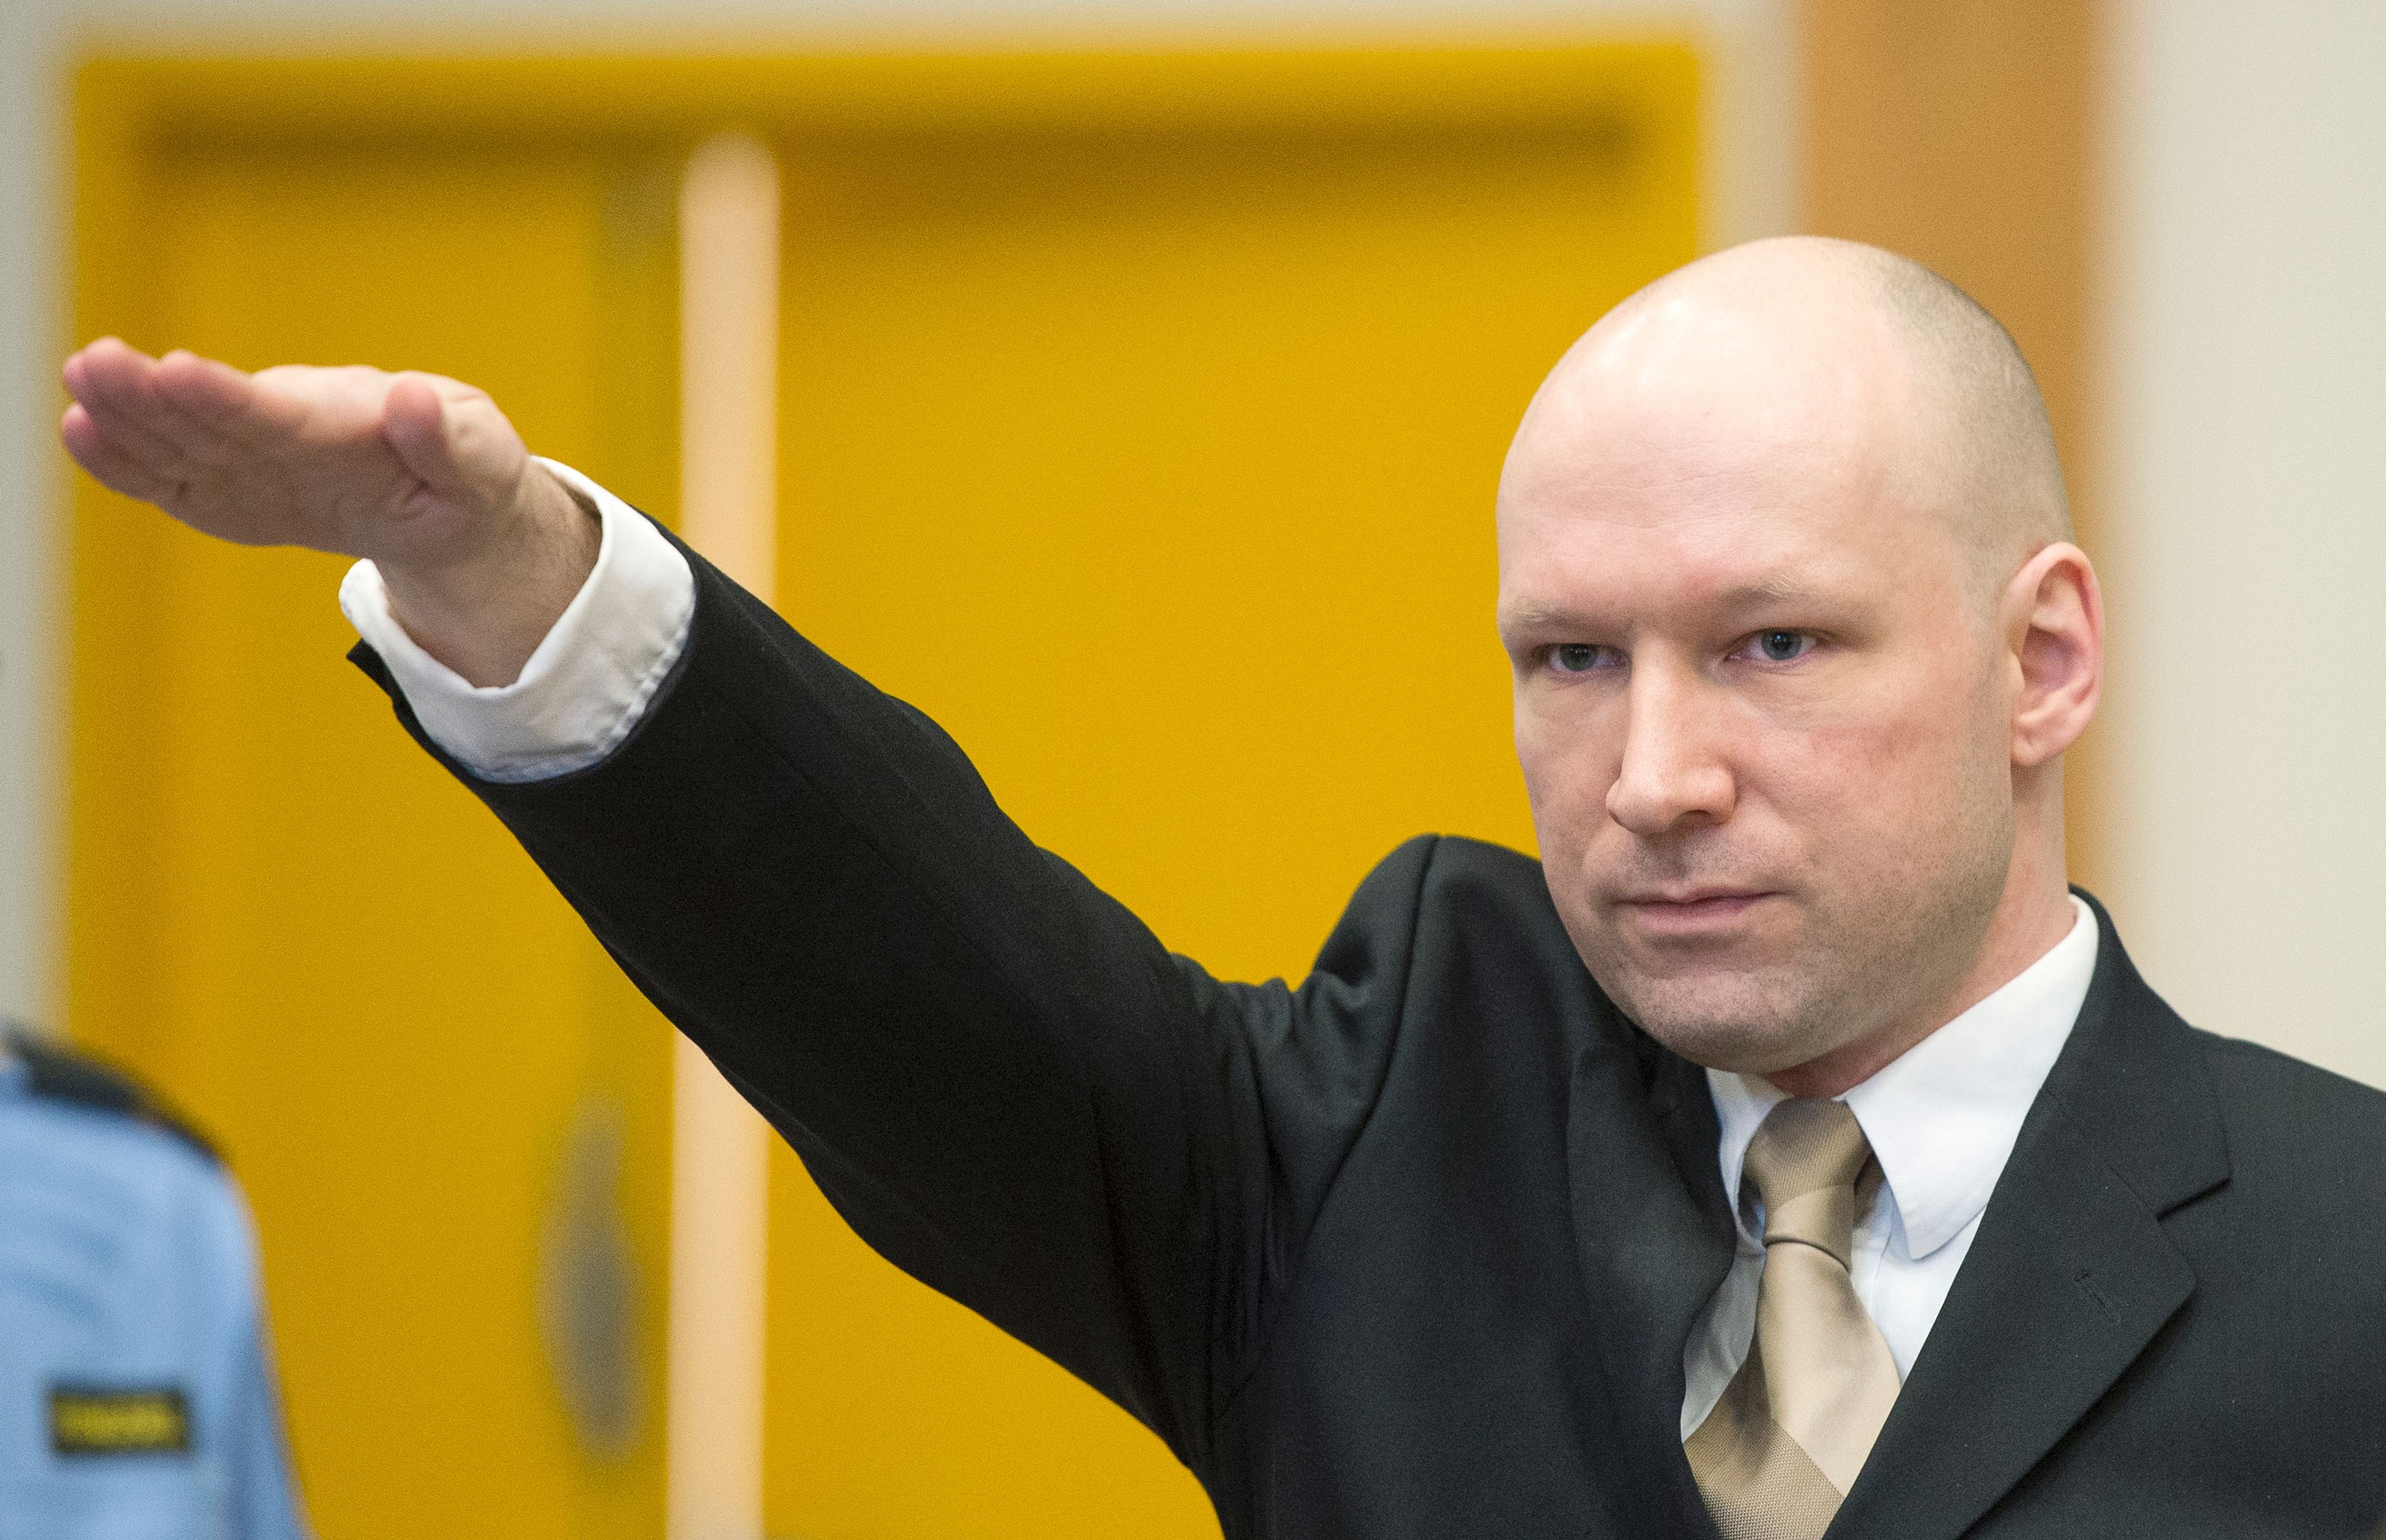 Norway mass killer Anders Behring Breivik human rights violated by